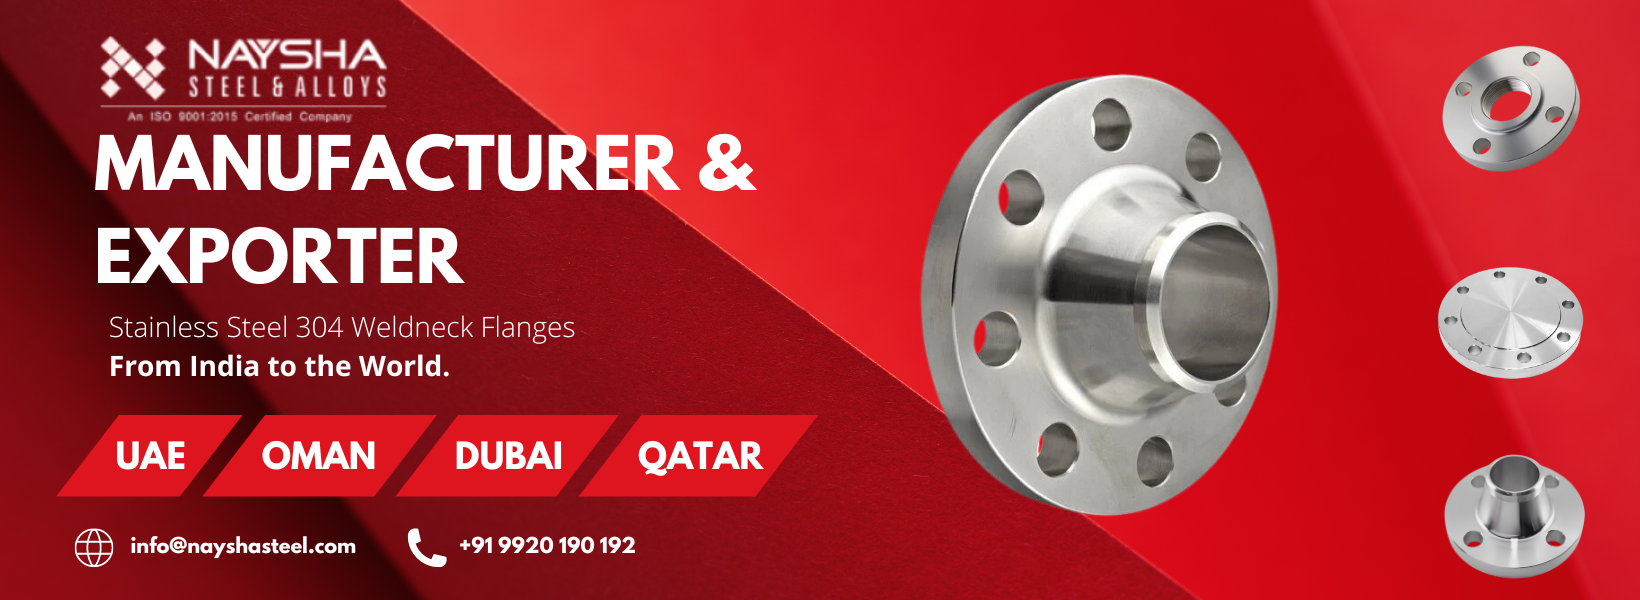 Stainless Steel 304 Weld Neck Flanges Manufacturer and Exporter in Saudi Arabia